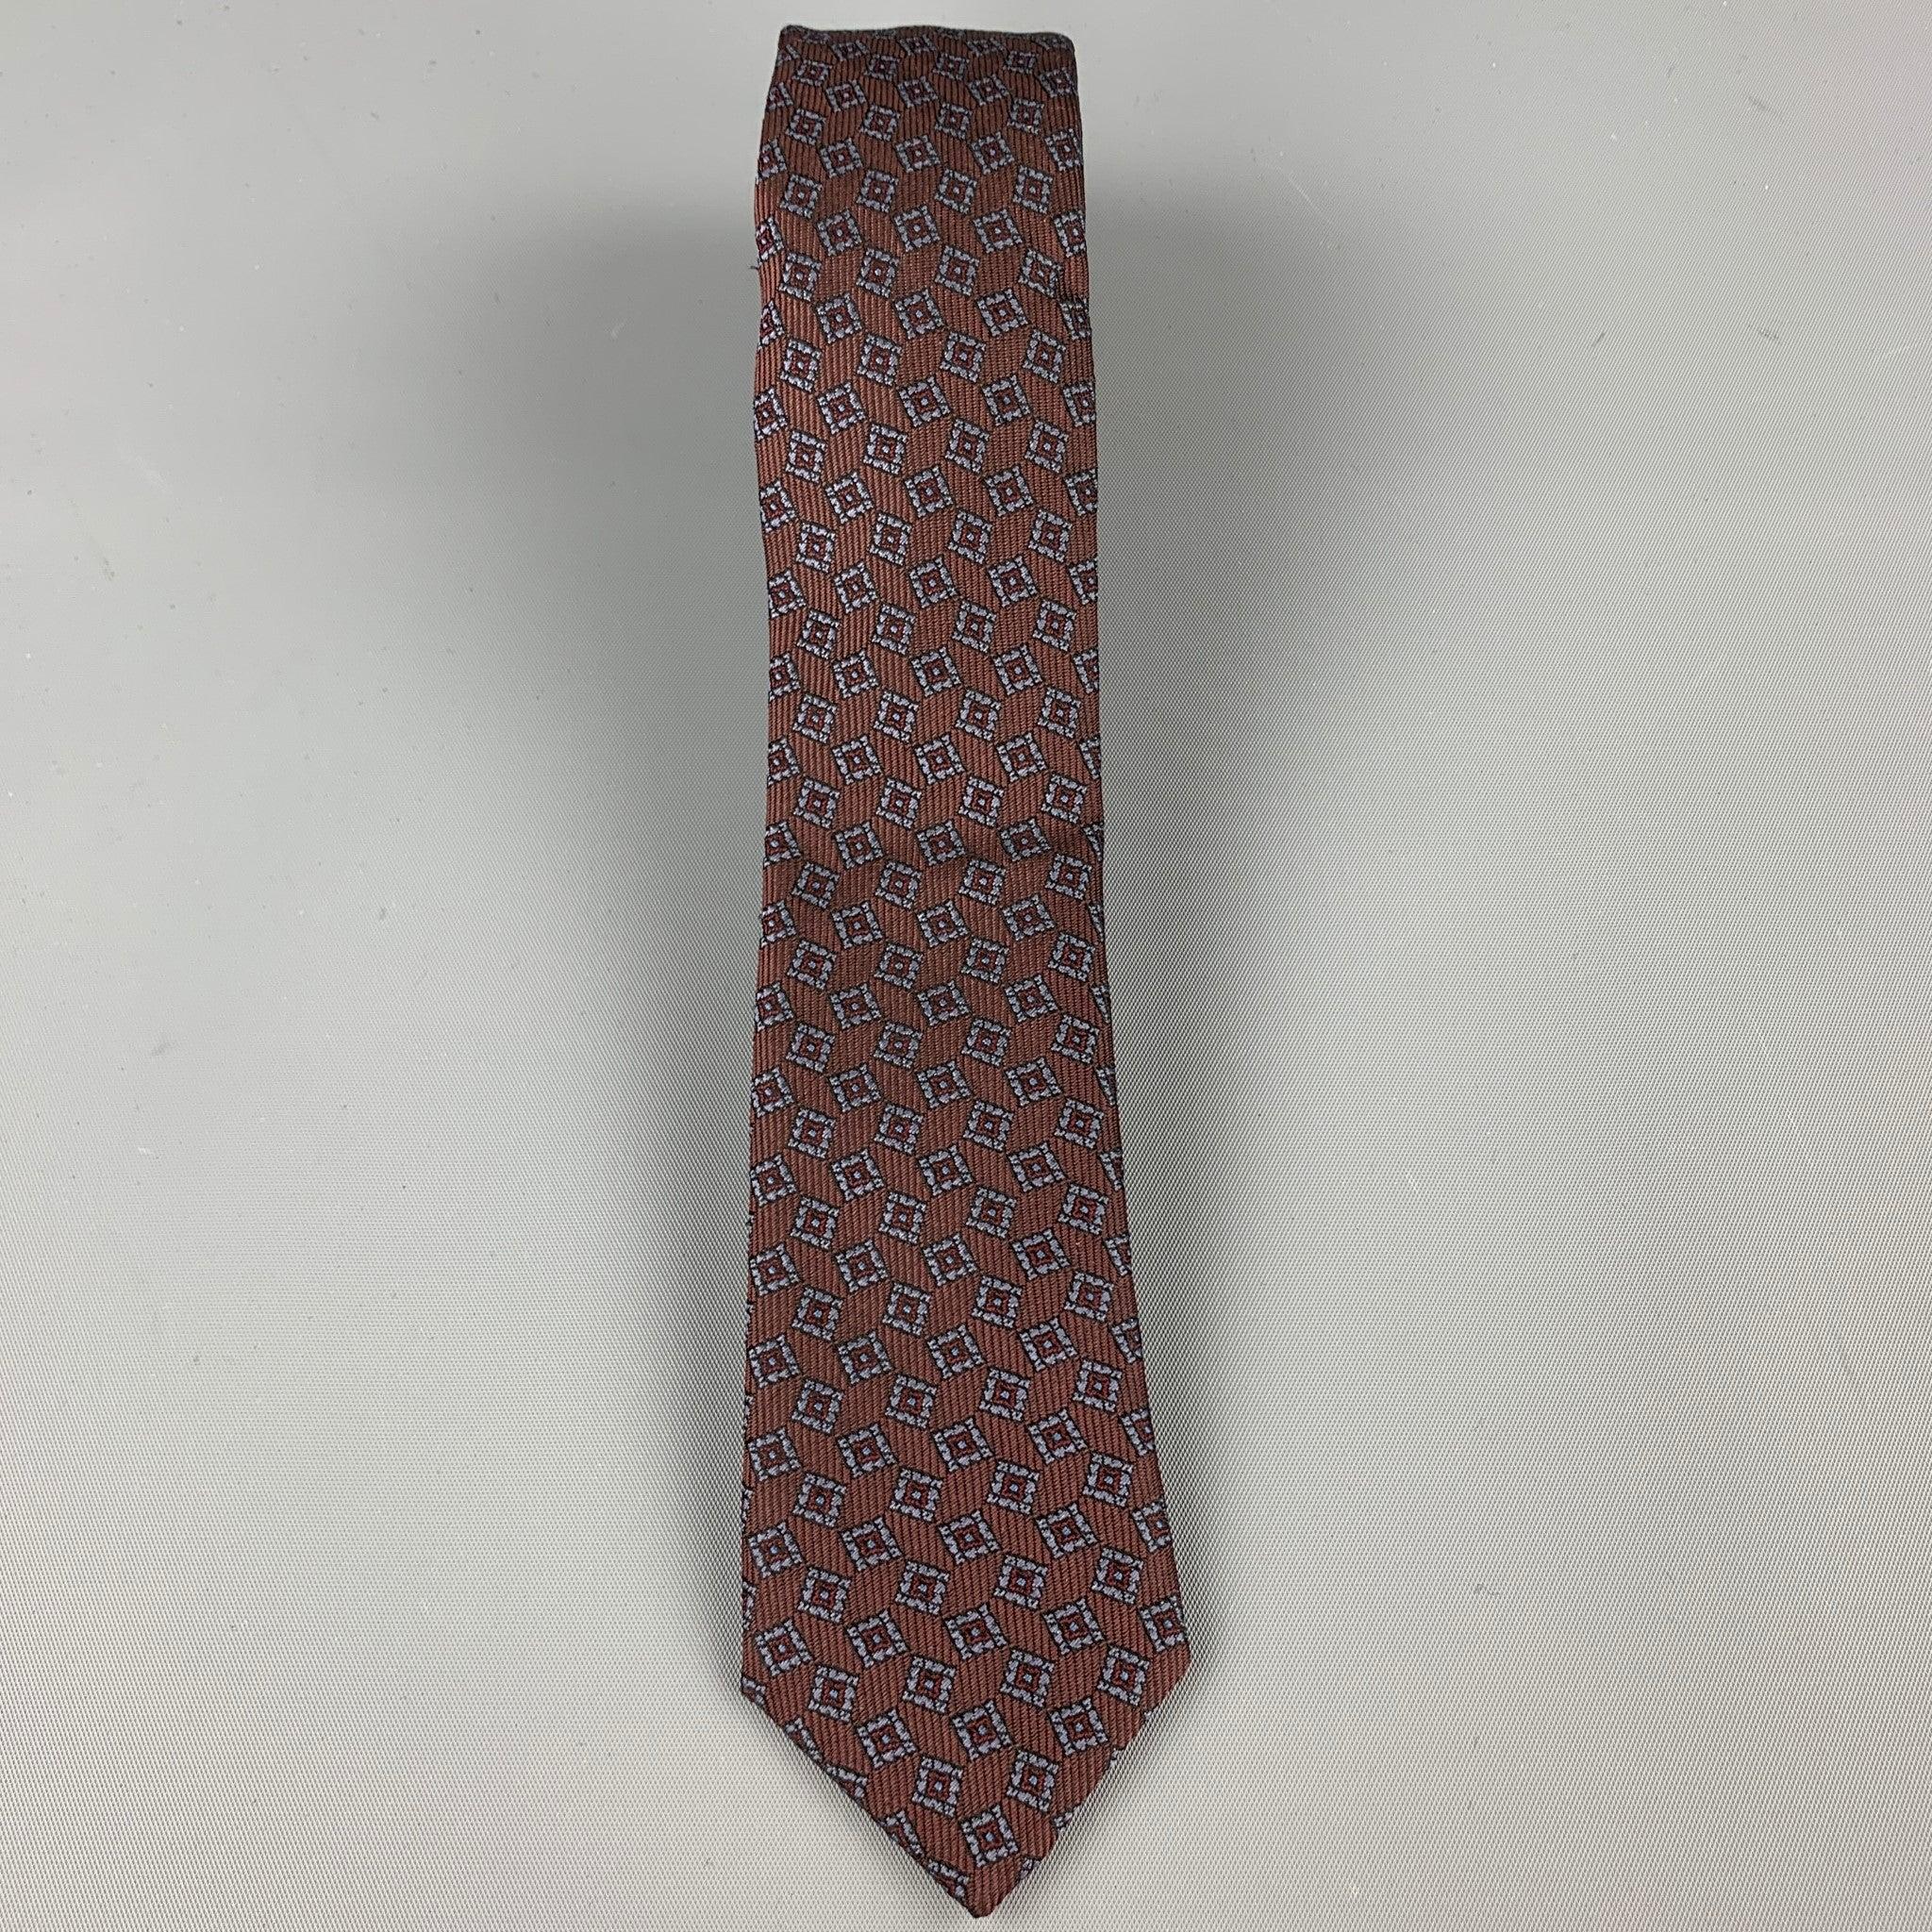 BURBERRY PRORSUM
 skinny tie comes in taupe brown silk with navy geometric squares print.
  Made in England.Very Good Pre-Owned Condition.
 Width: 2 inches 
  
  
  
 Sui Generis Reference: 68465
 Category: Tie
 More Details
  
 Brand: BURBERRY